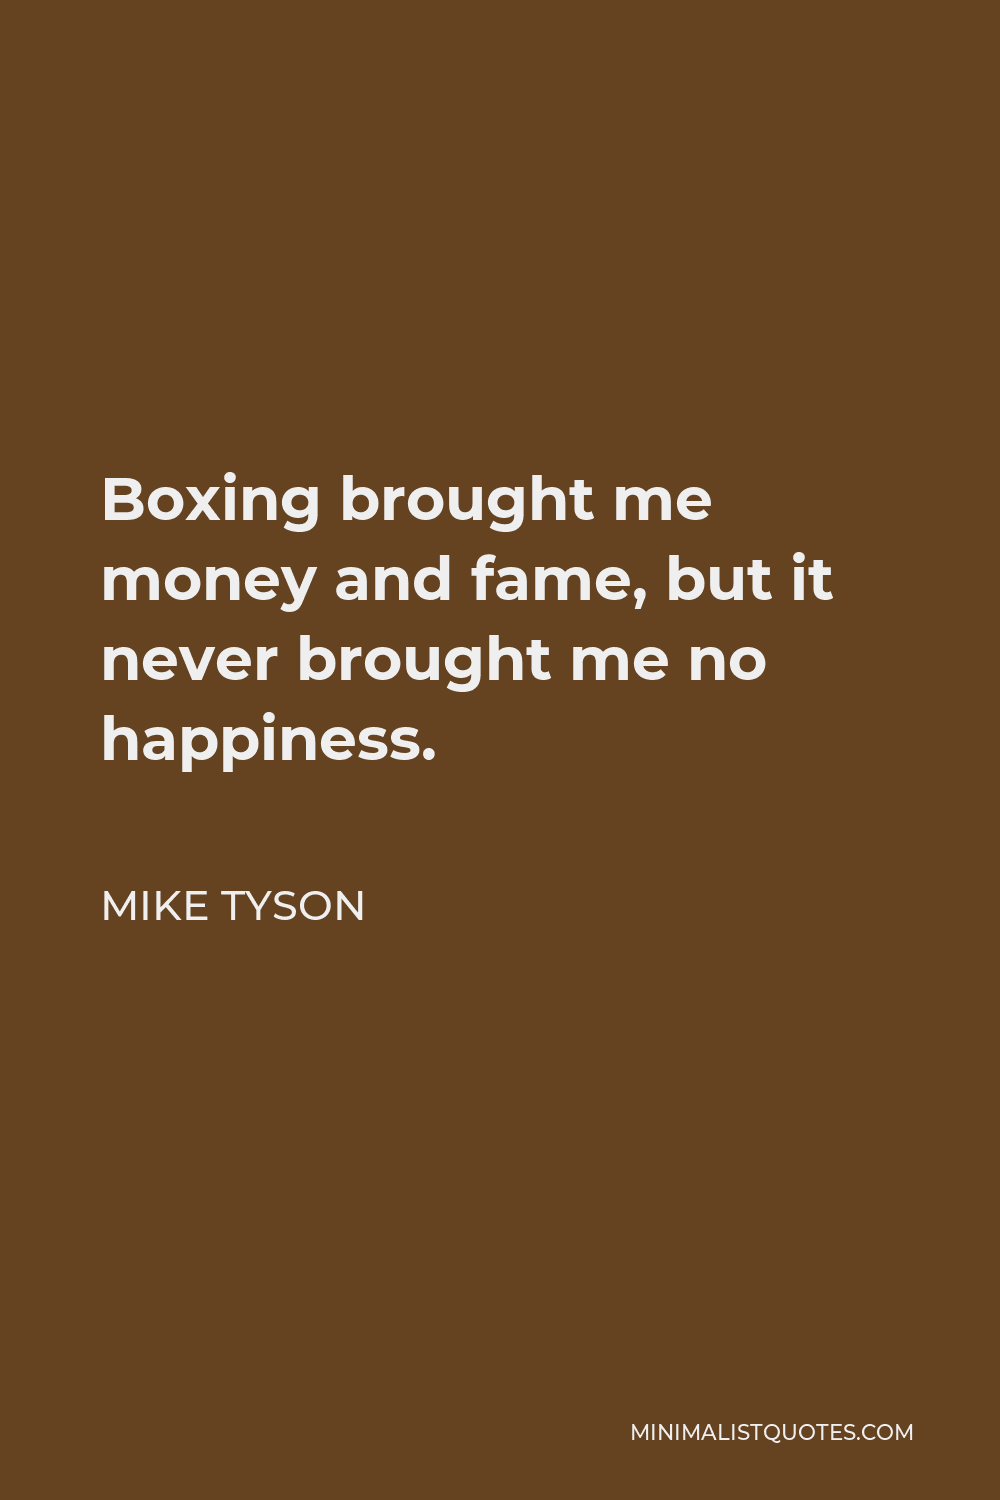 Mike Tyson Quote - Boxing brought me money and fame, but it never brought me no happiness.